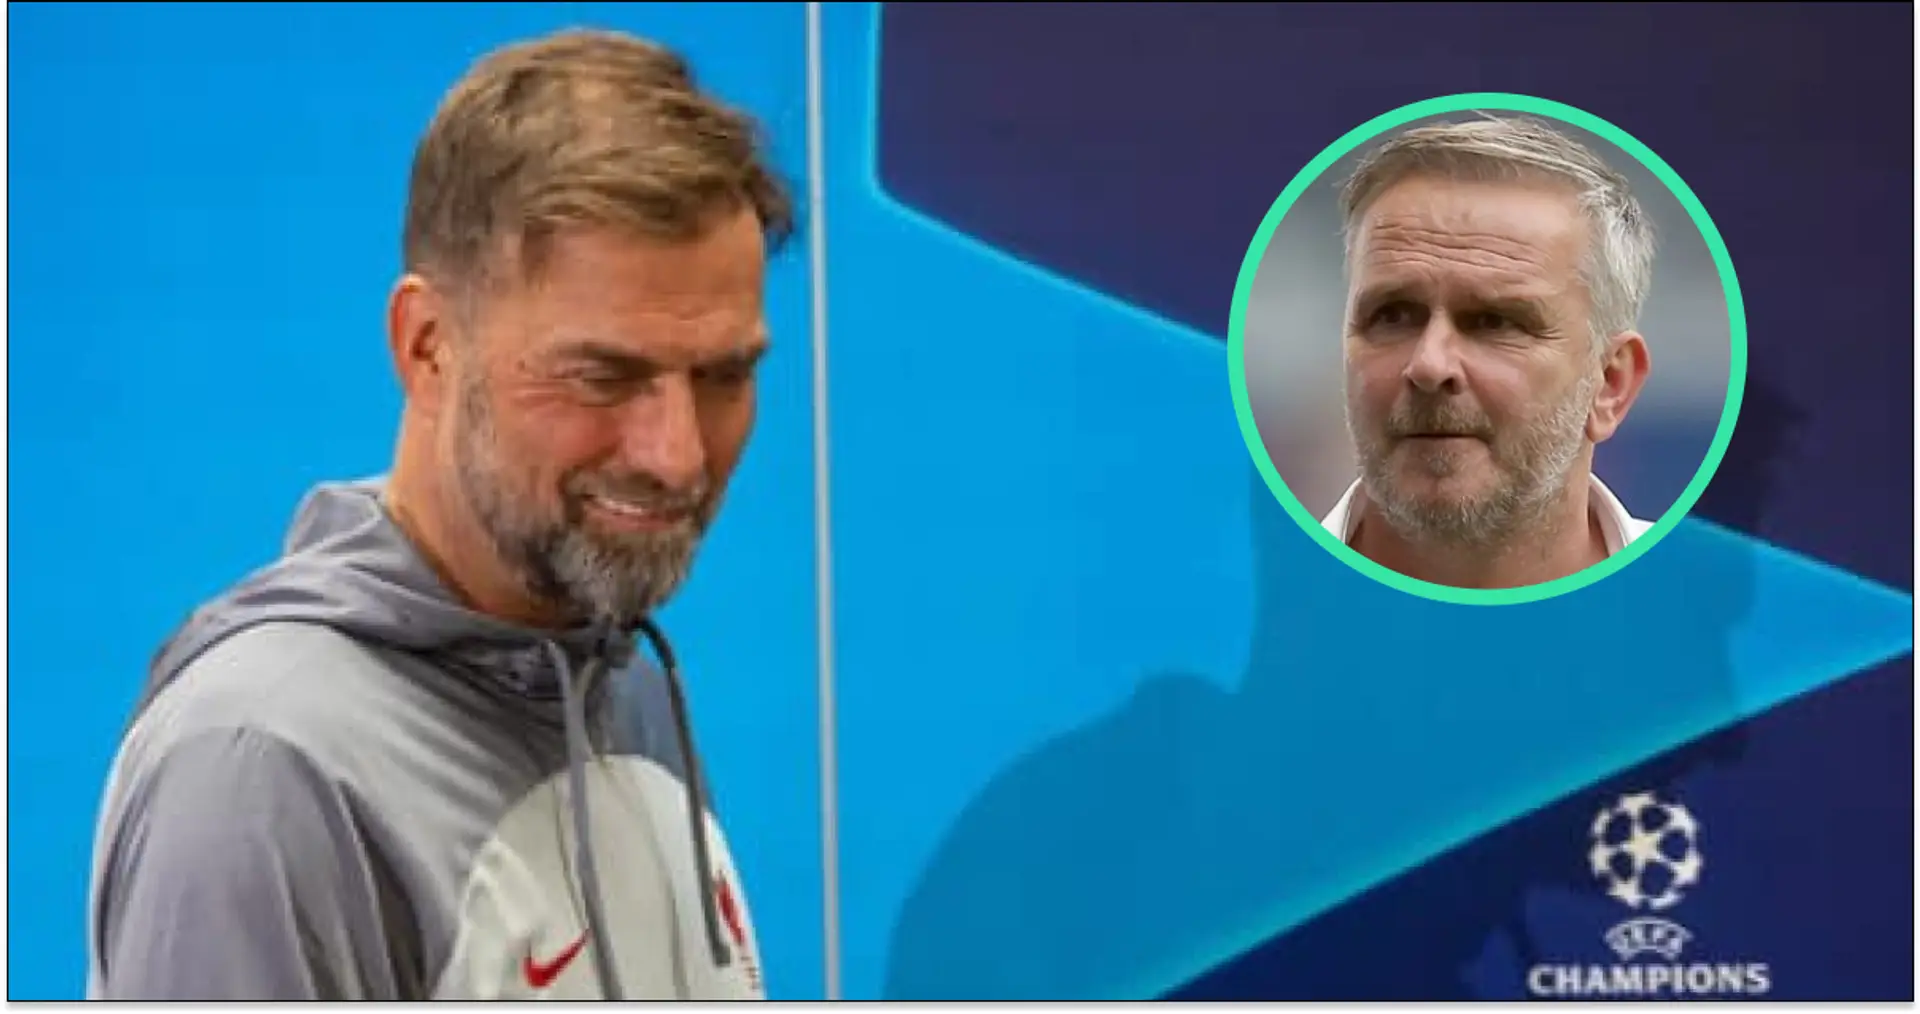 Hamann tells Liverpool and Klopp to part ways: 'Best for both sides'